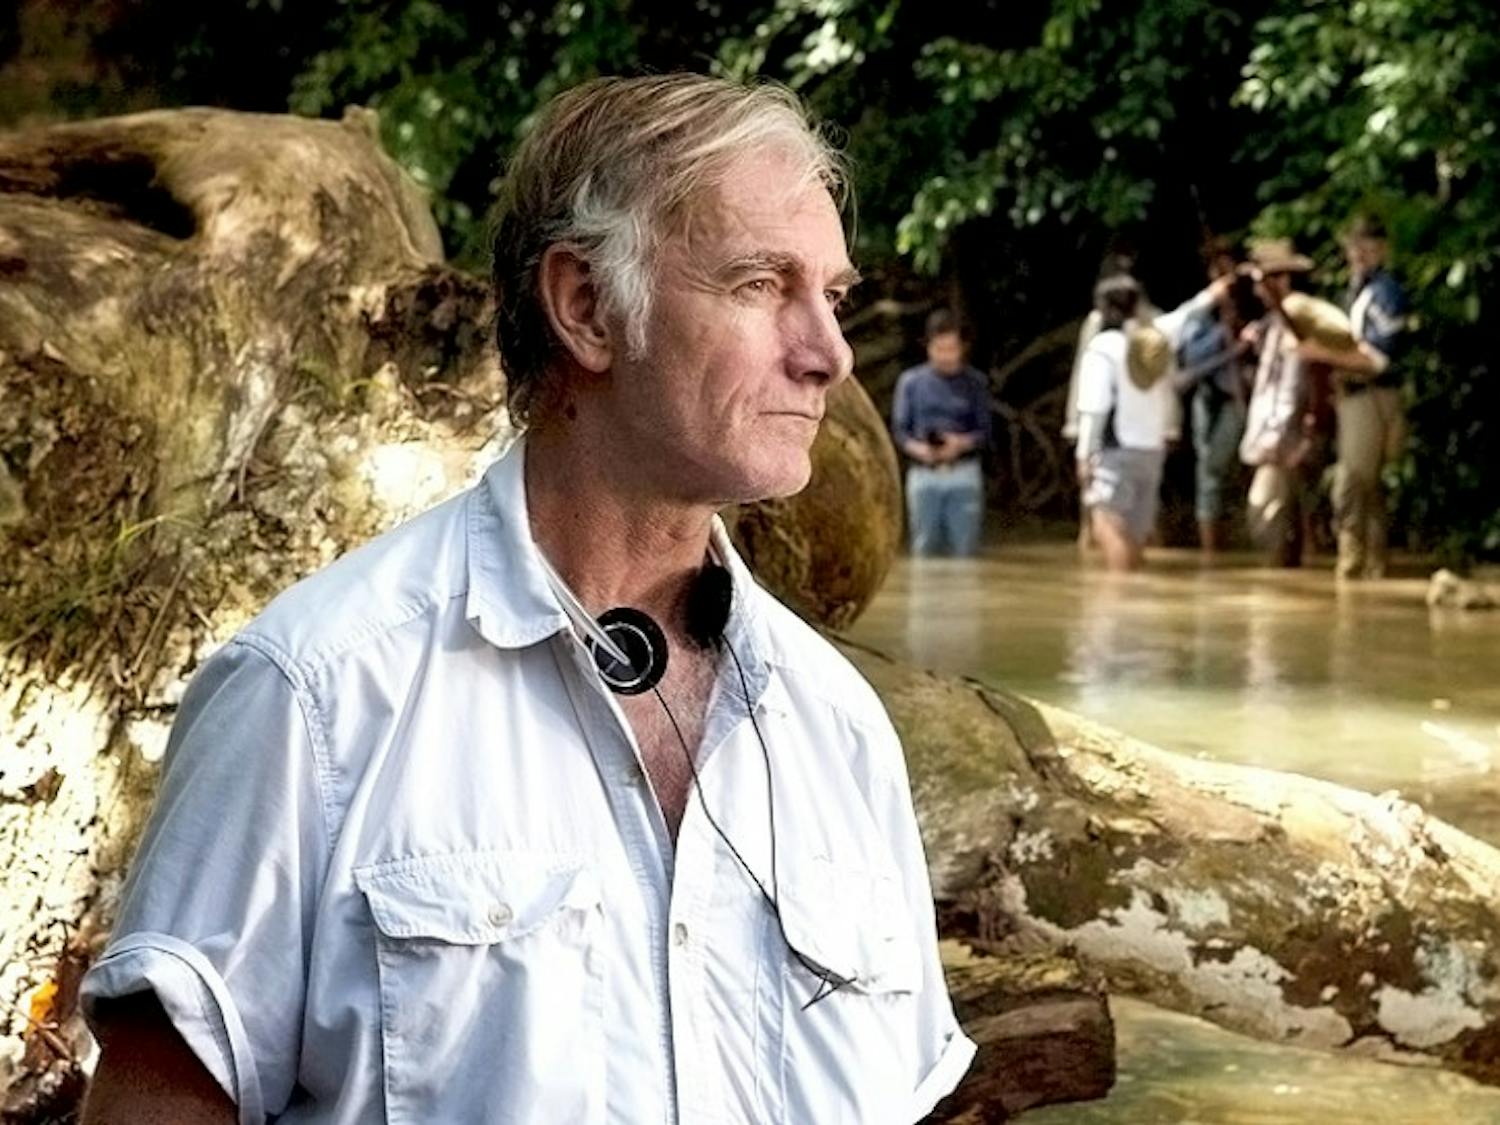 Independent filmmaker John Sayles was named this year's Nicholas School of the Environment LEAF Award recipient.